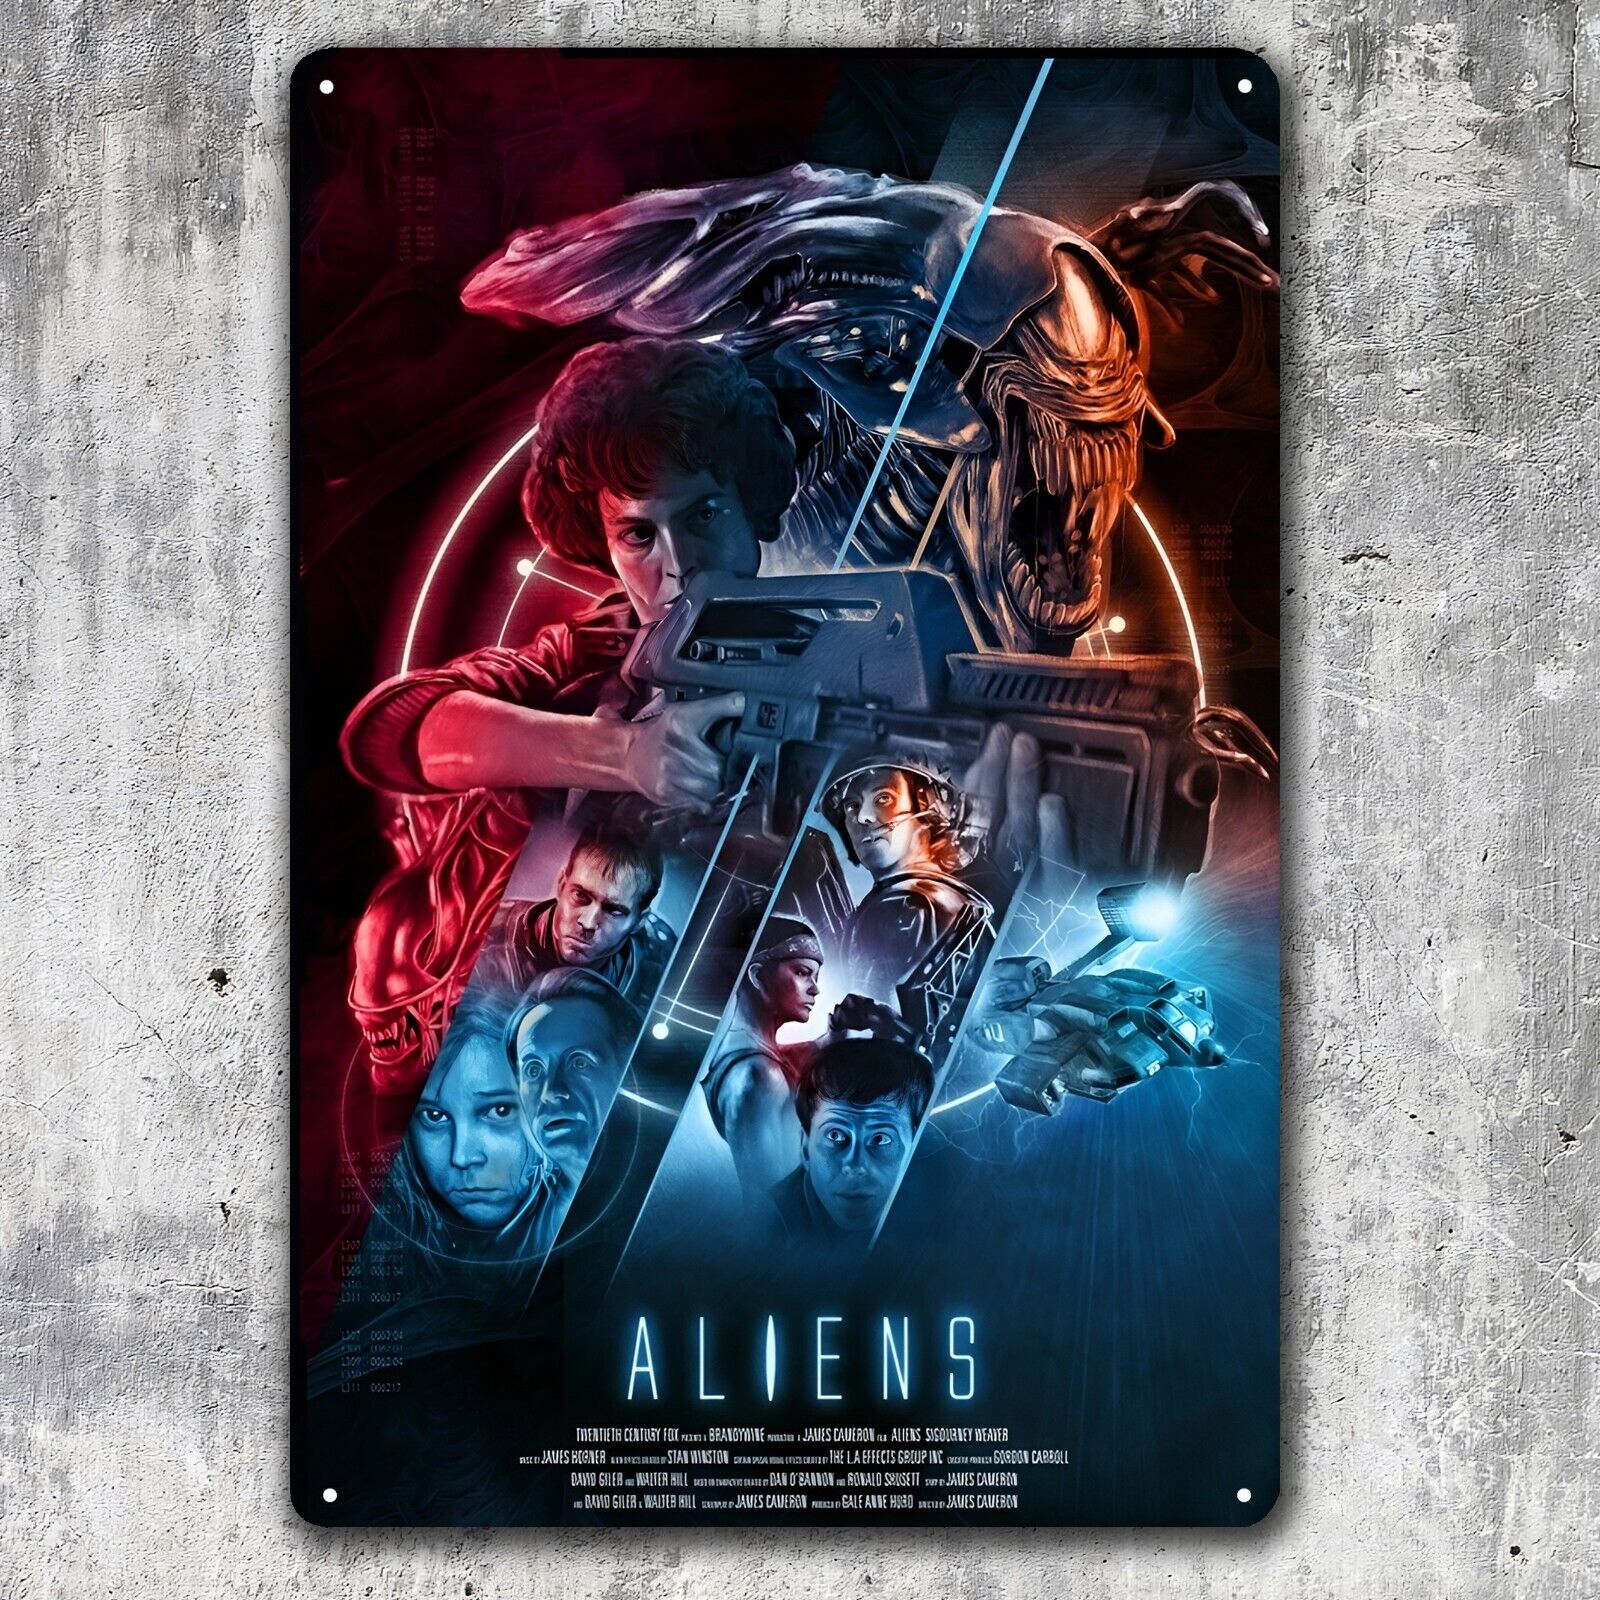 Aliens Movie Metal Poster -  Collectable Tin Sign - 20x30cm